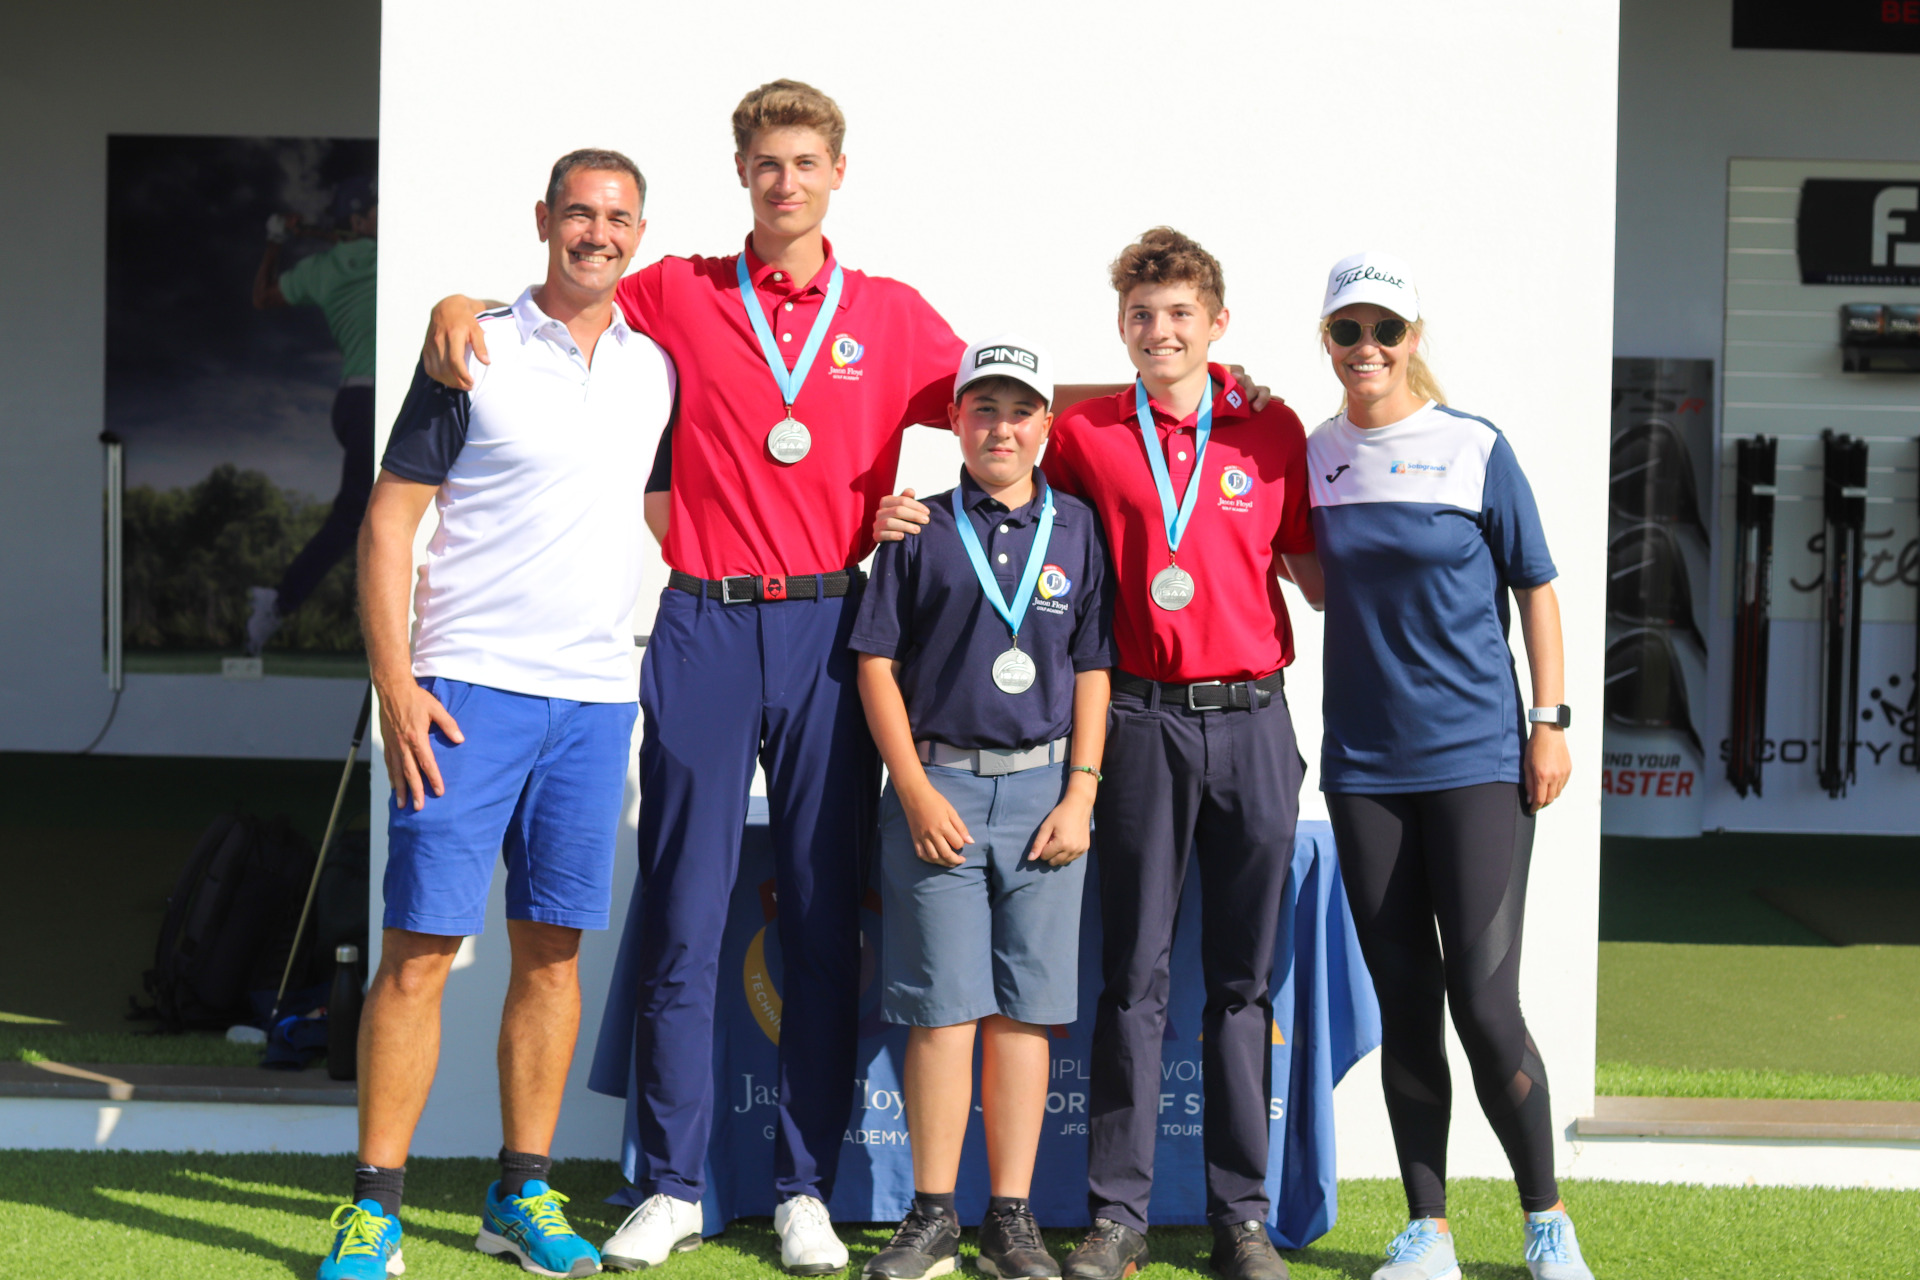 Students from Sotogrande International School and the Jason Floyd Golf Academy won second place in the teams category.